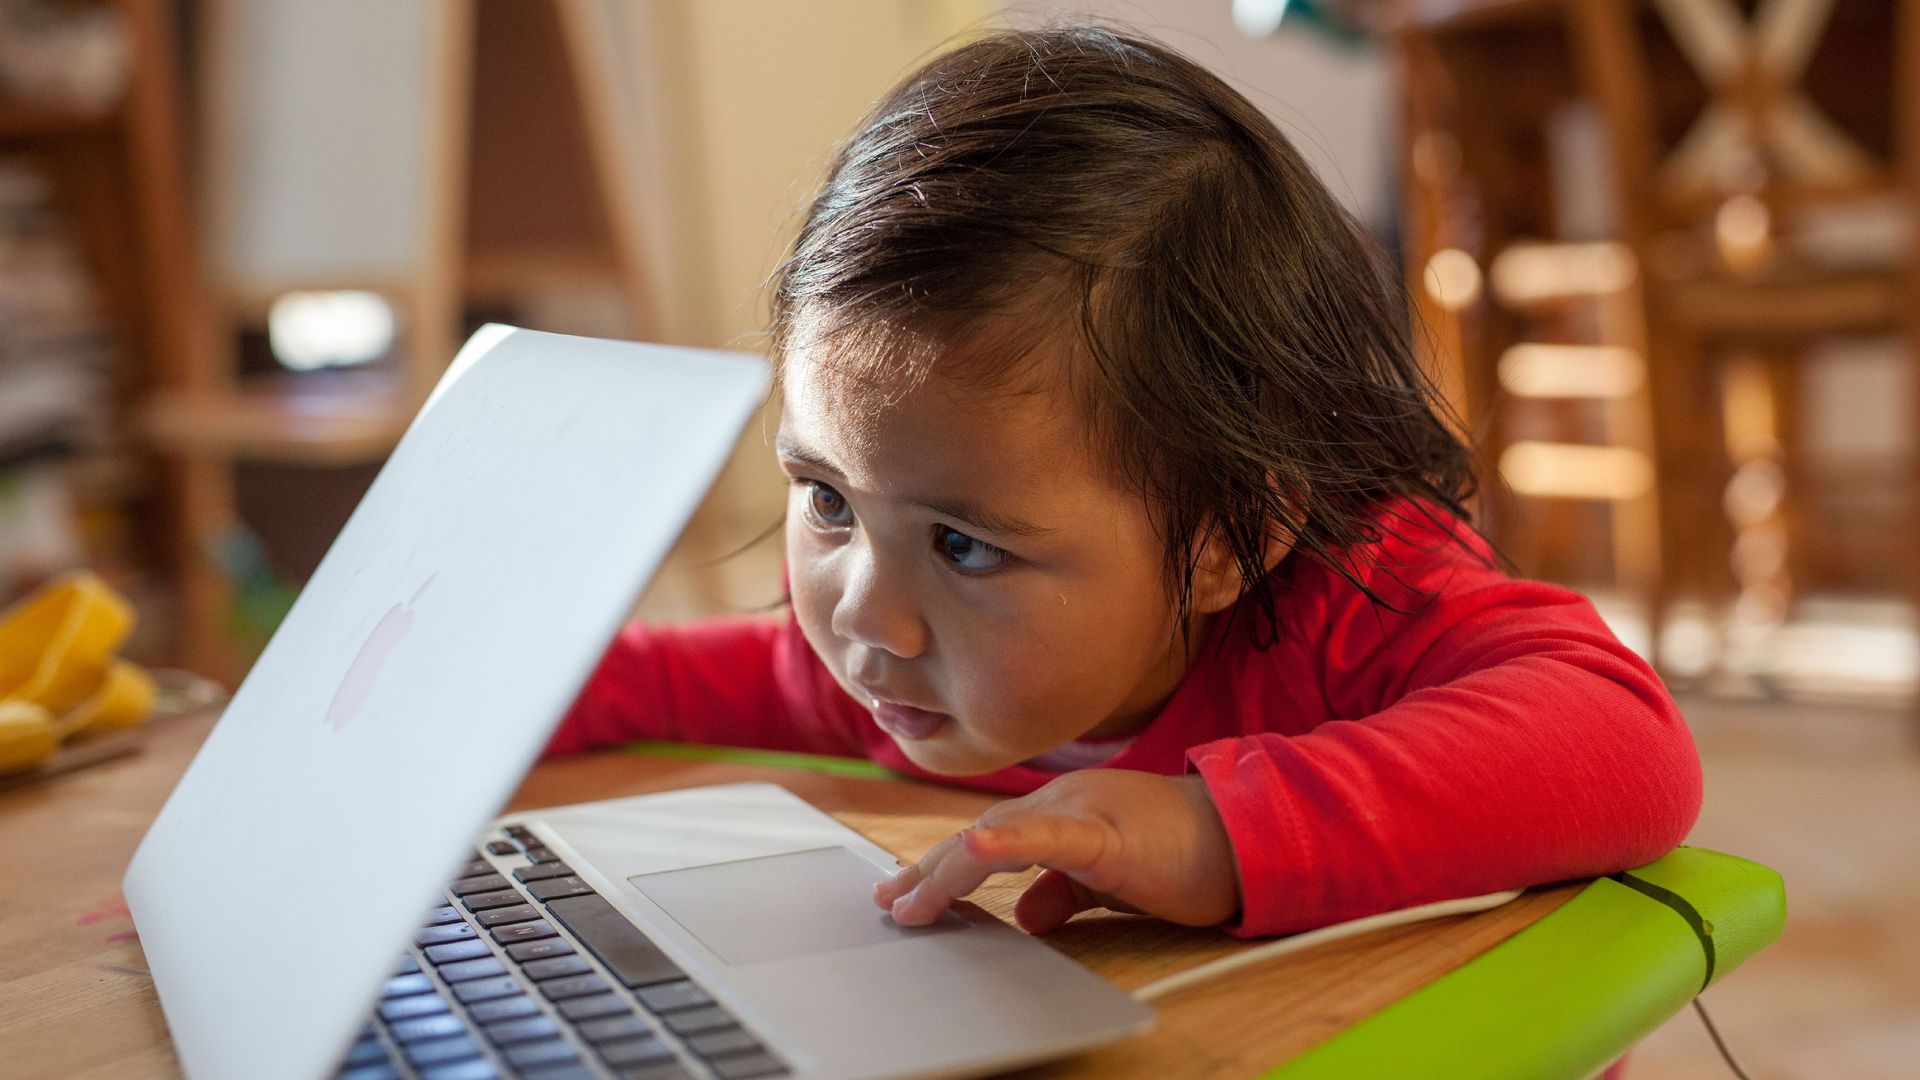 A toddler looking at a laptop screen.